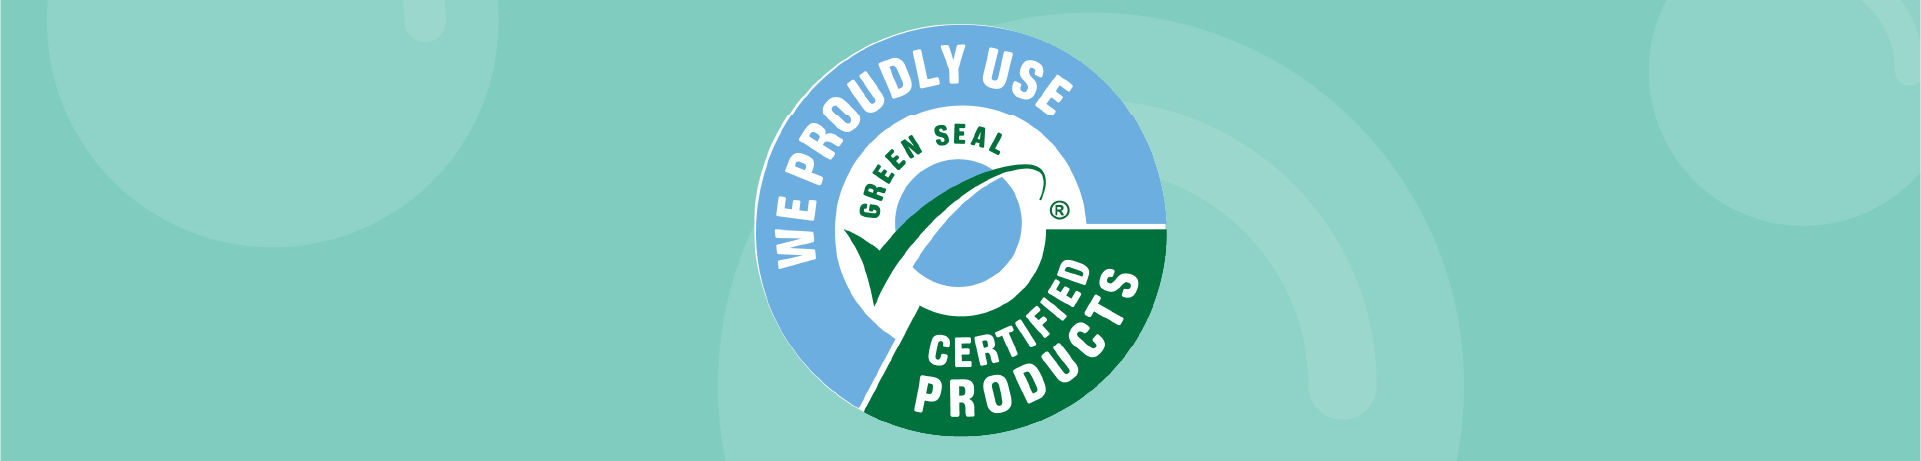  Home Clean Heroes proudly uses green seal products